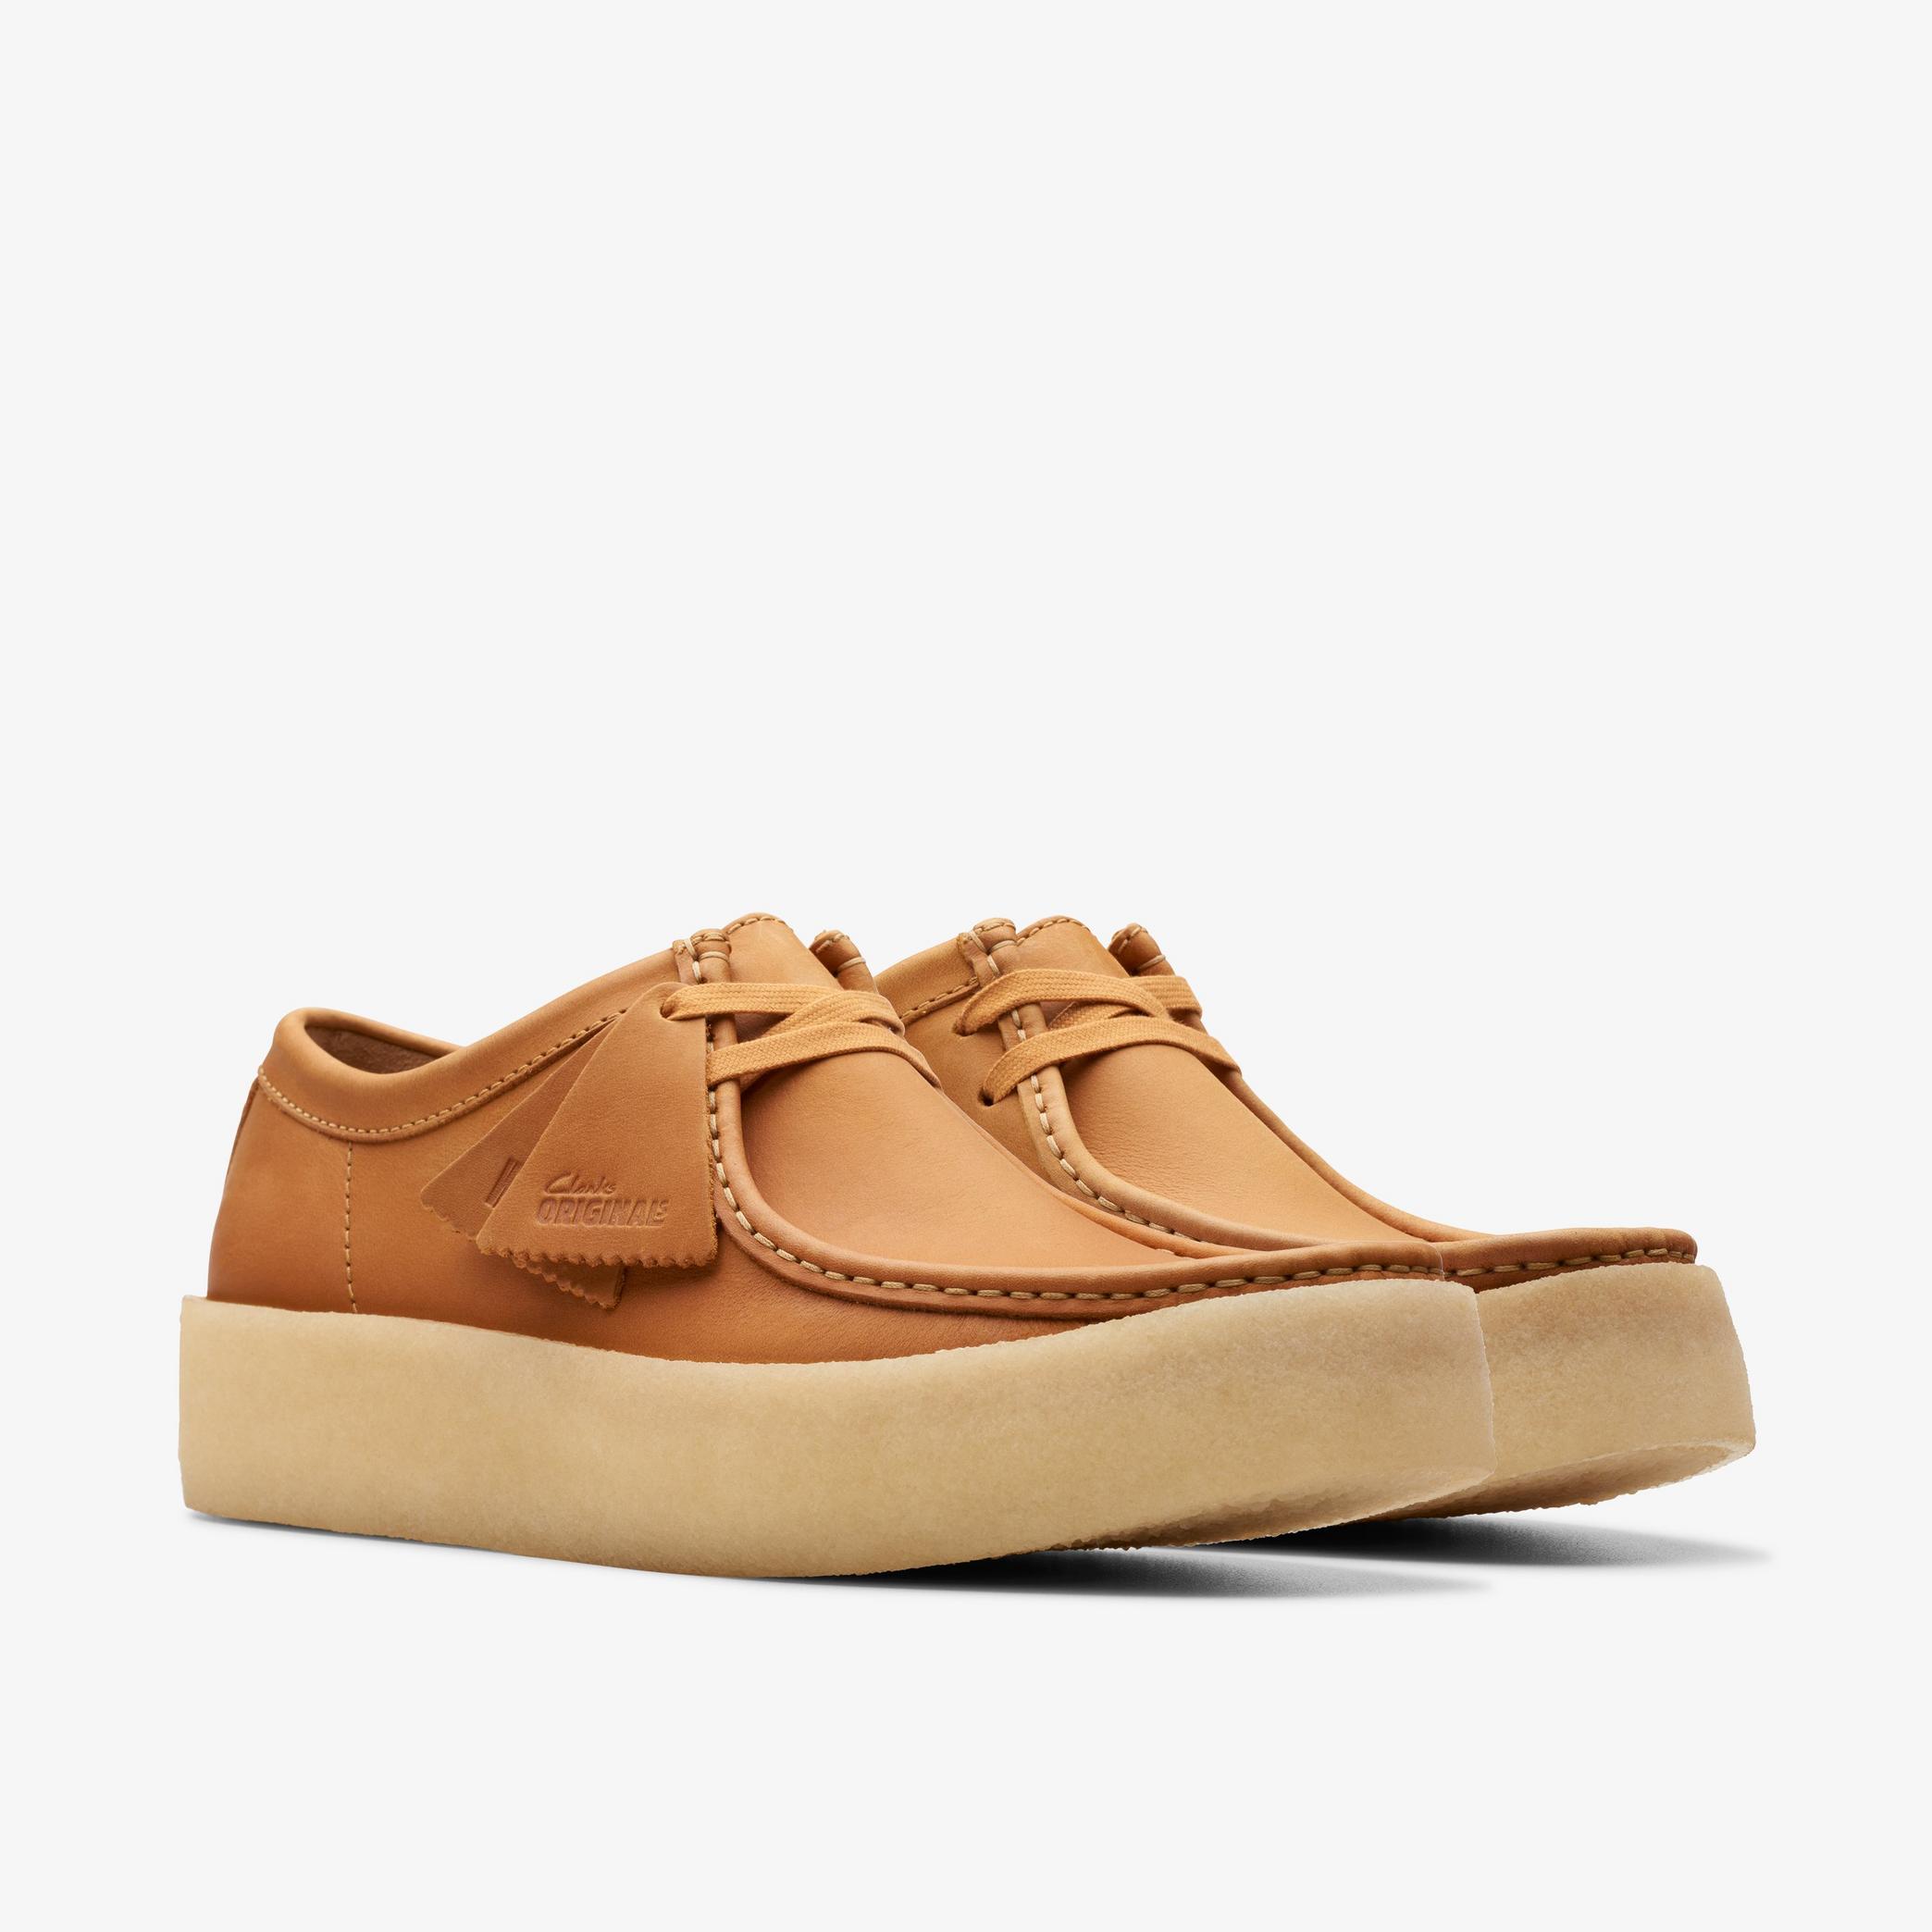 Wallabee Cup Mid Tan Leather Wallabee, view 4 of 6